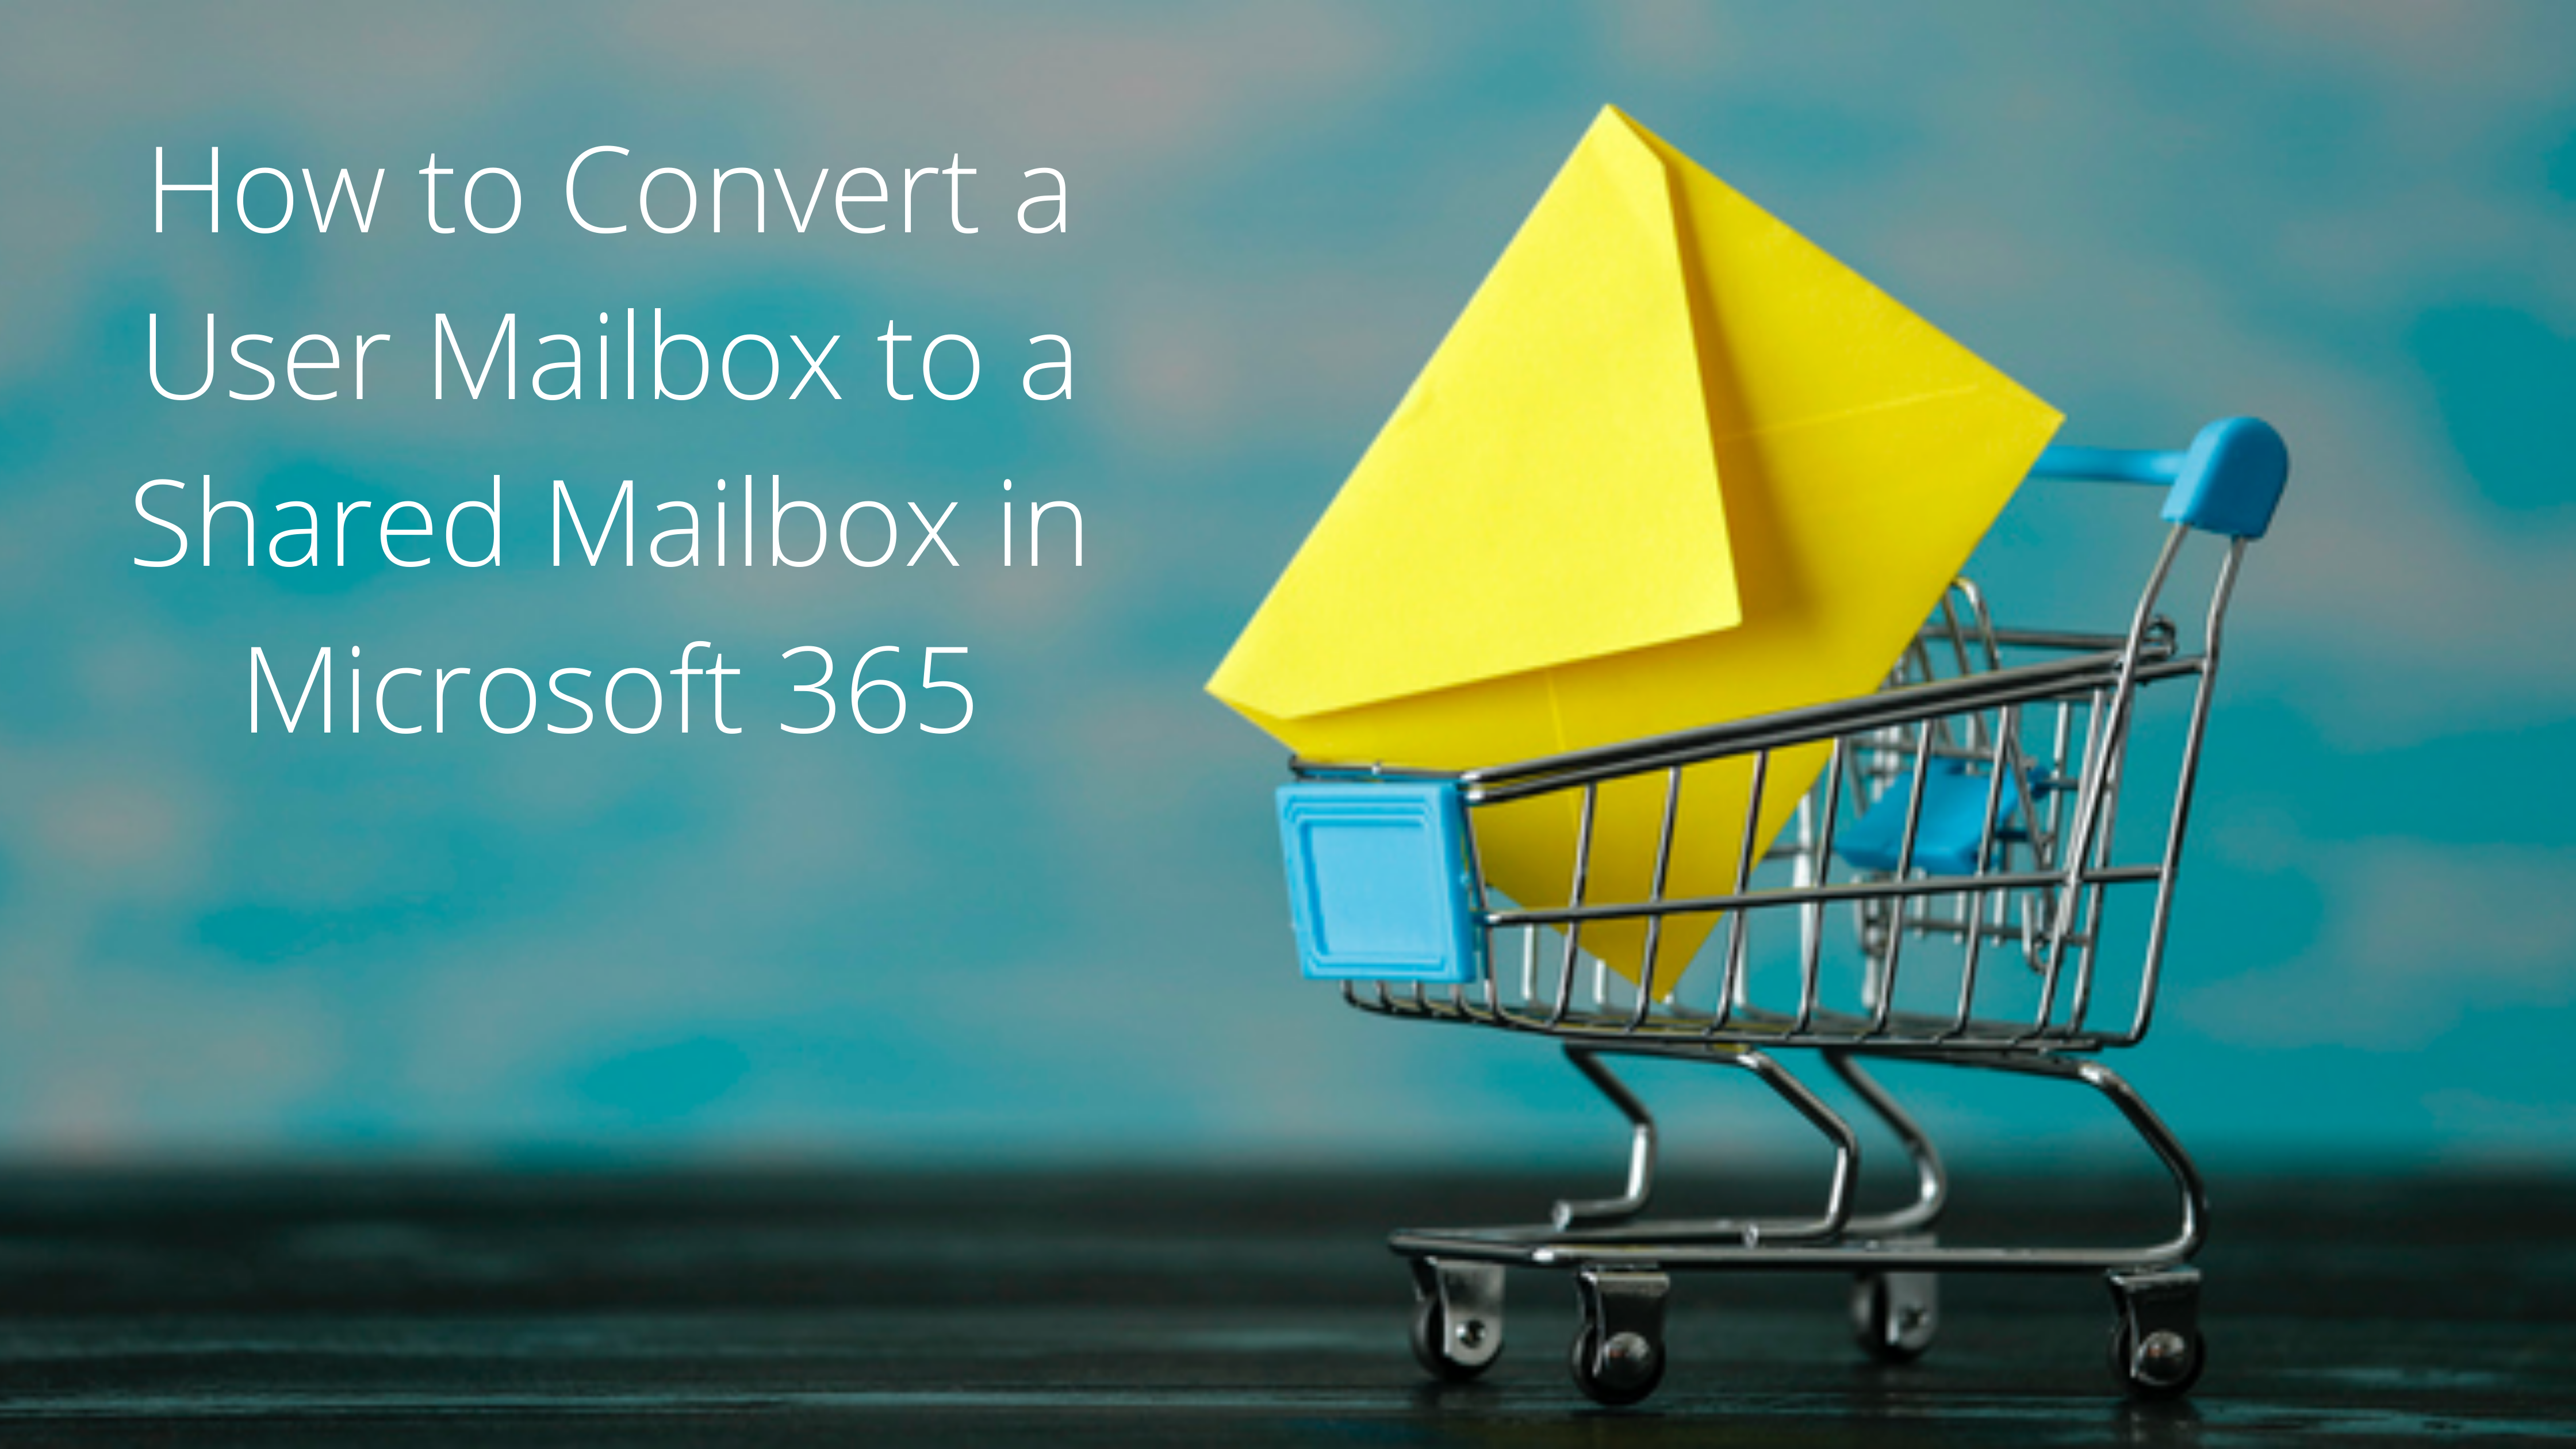 How-to-Convert-a-User-Mailbox-to-a-Shared-Mailbox-in-Microsoft-365